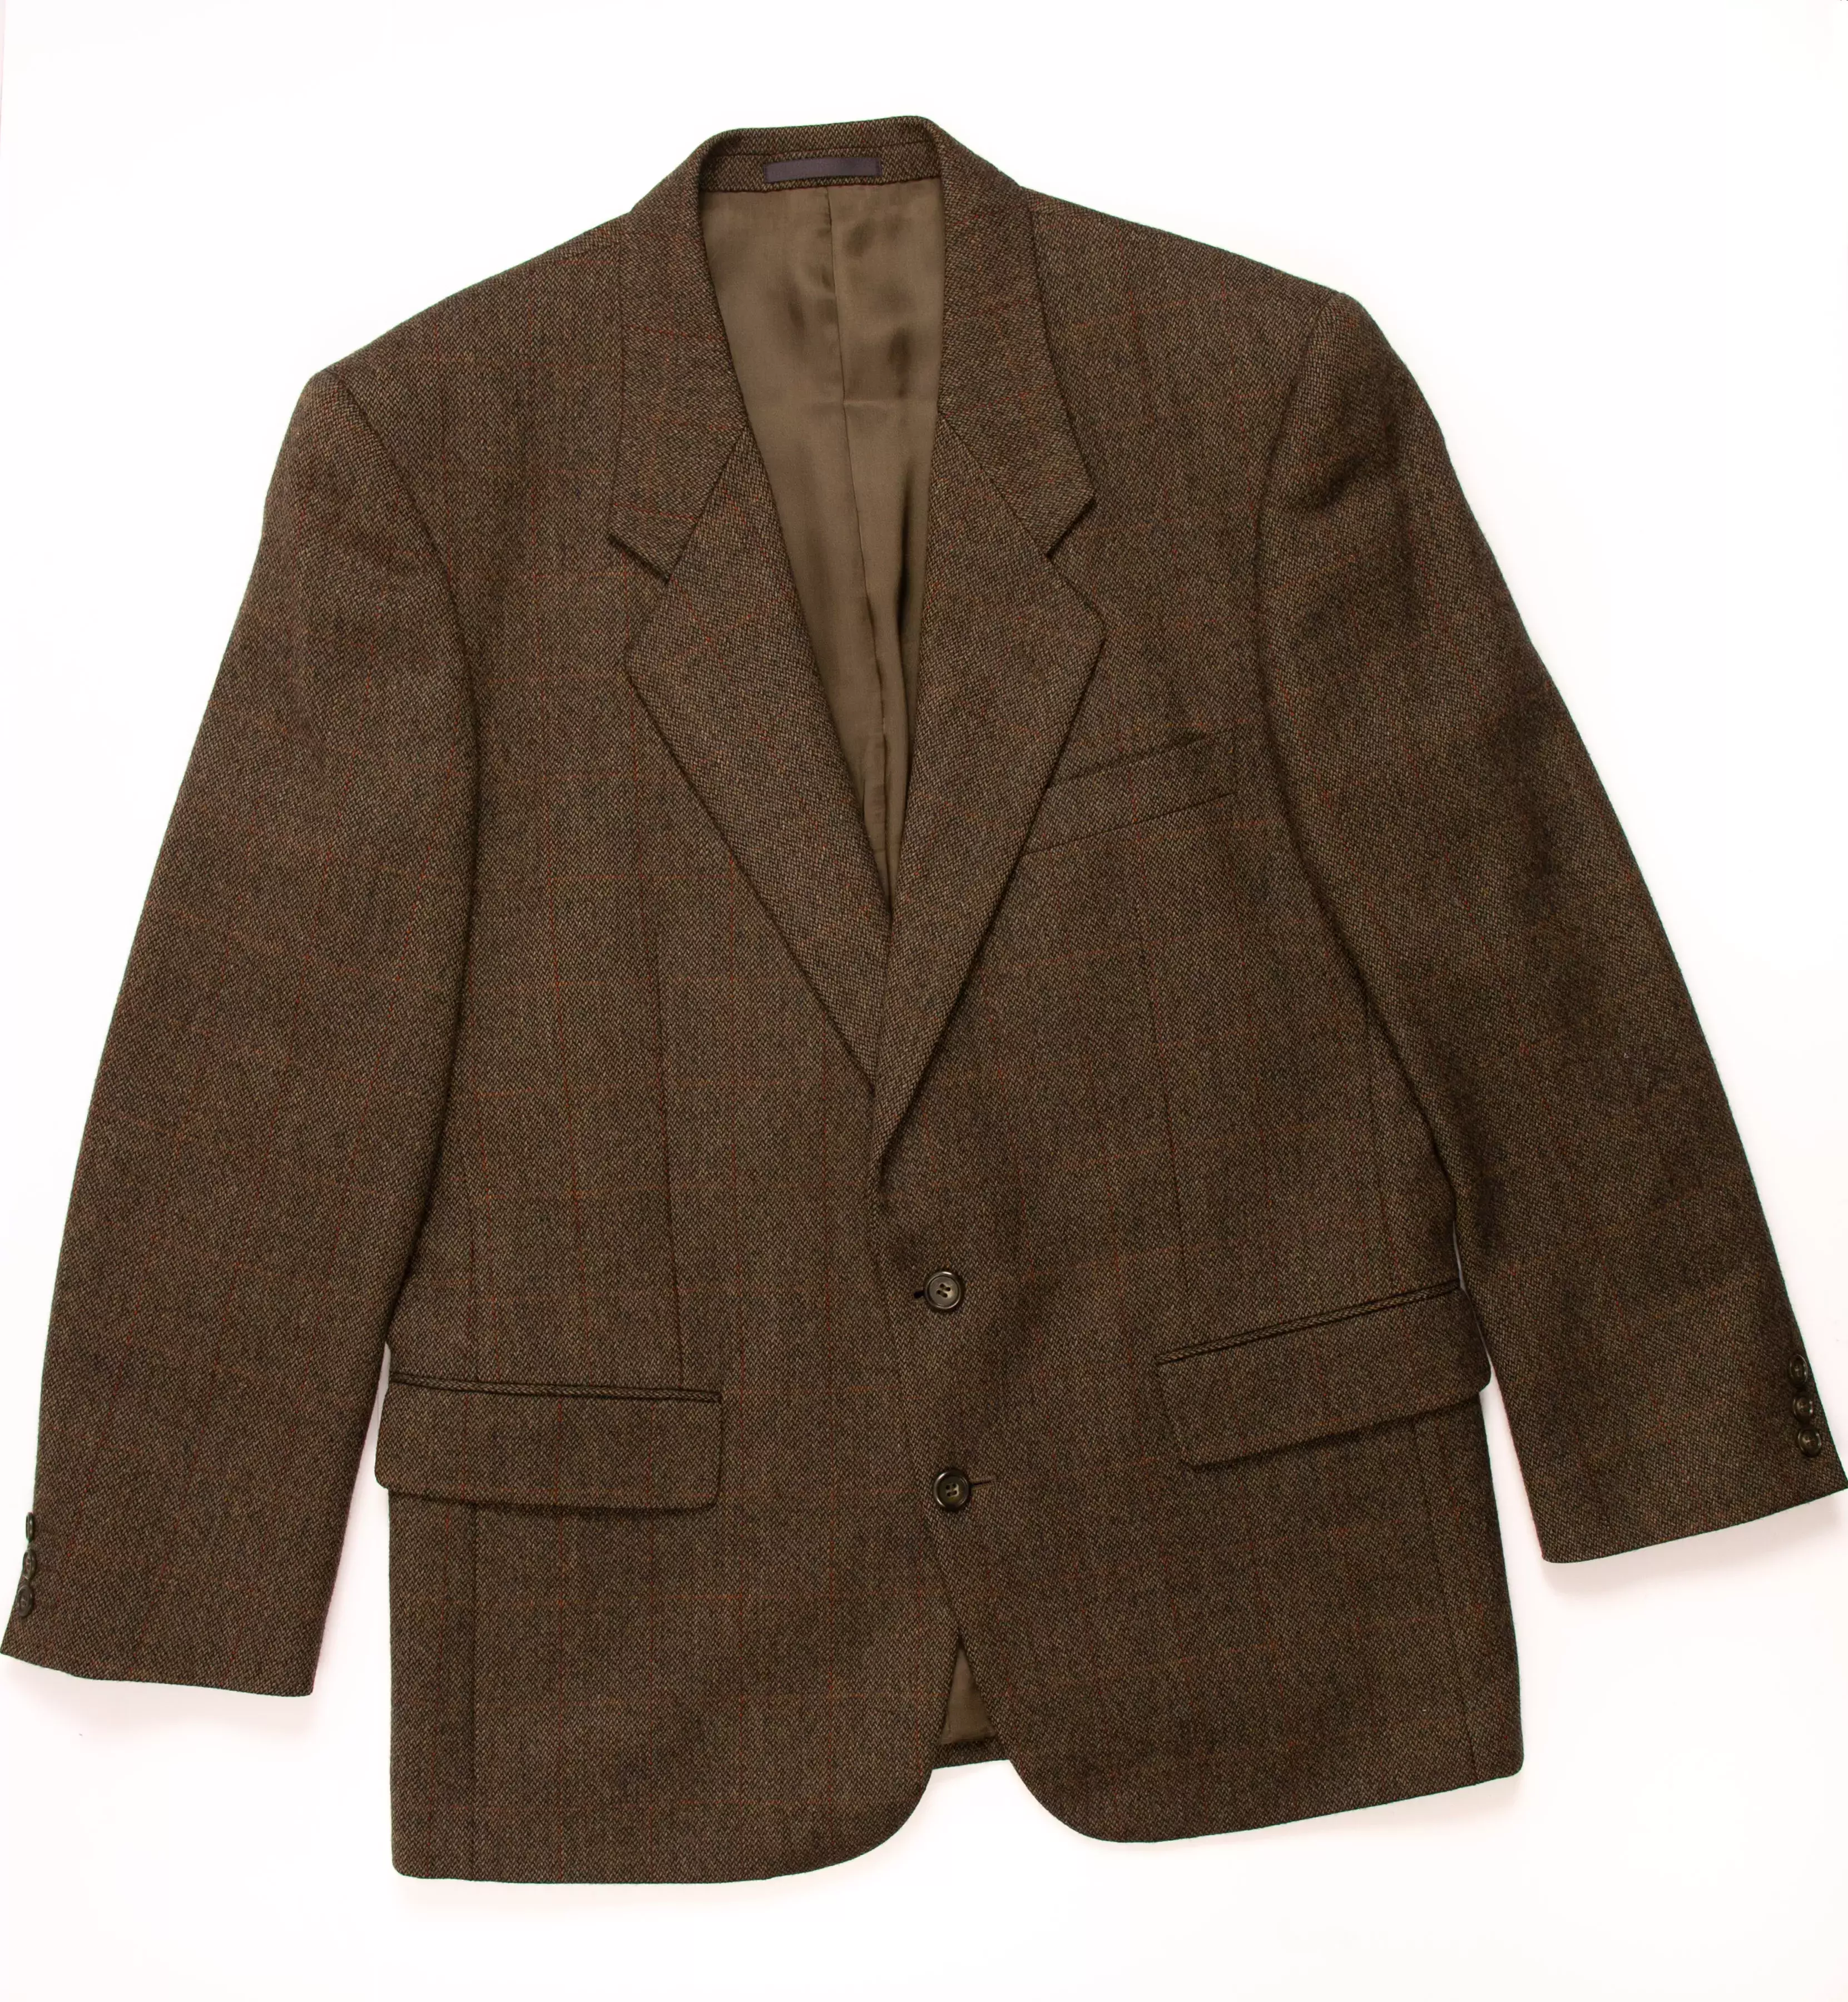 A brown sports jacket.  